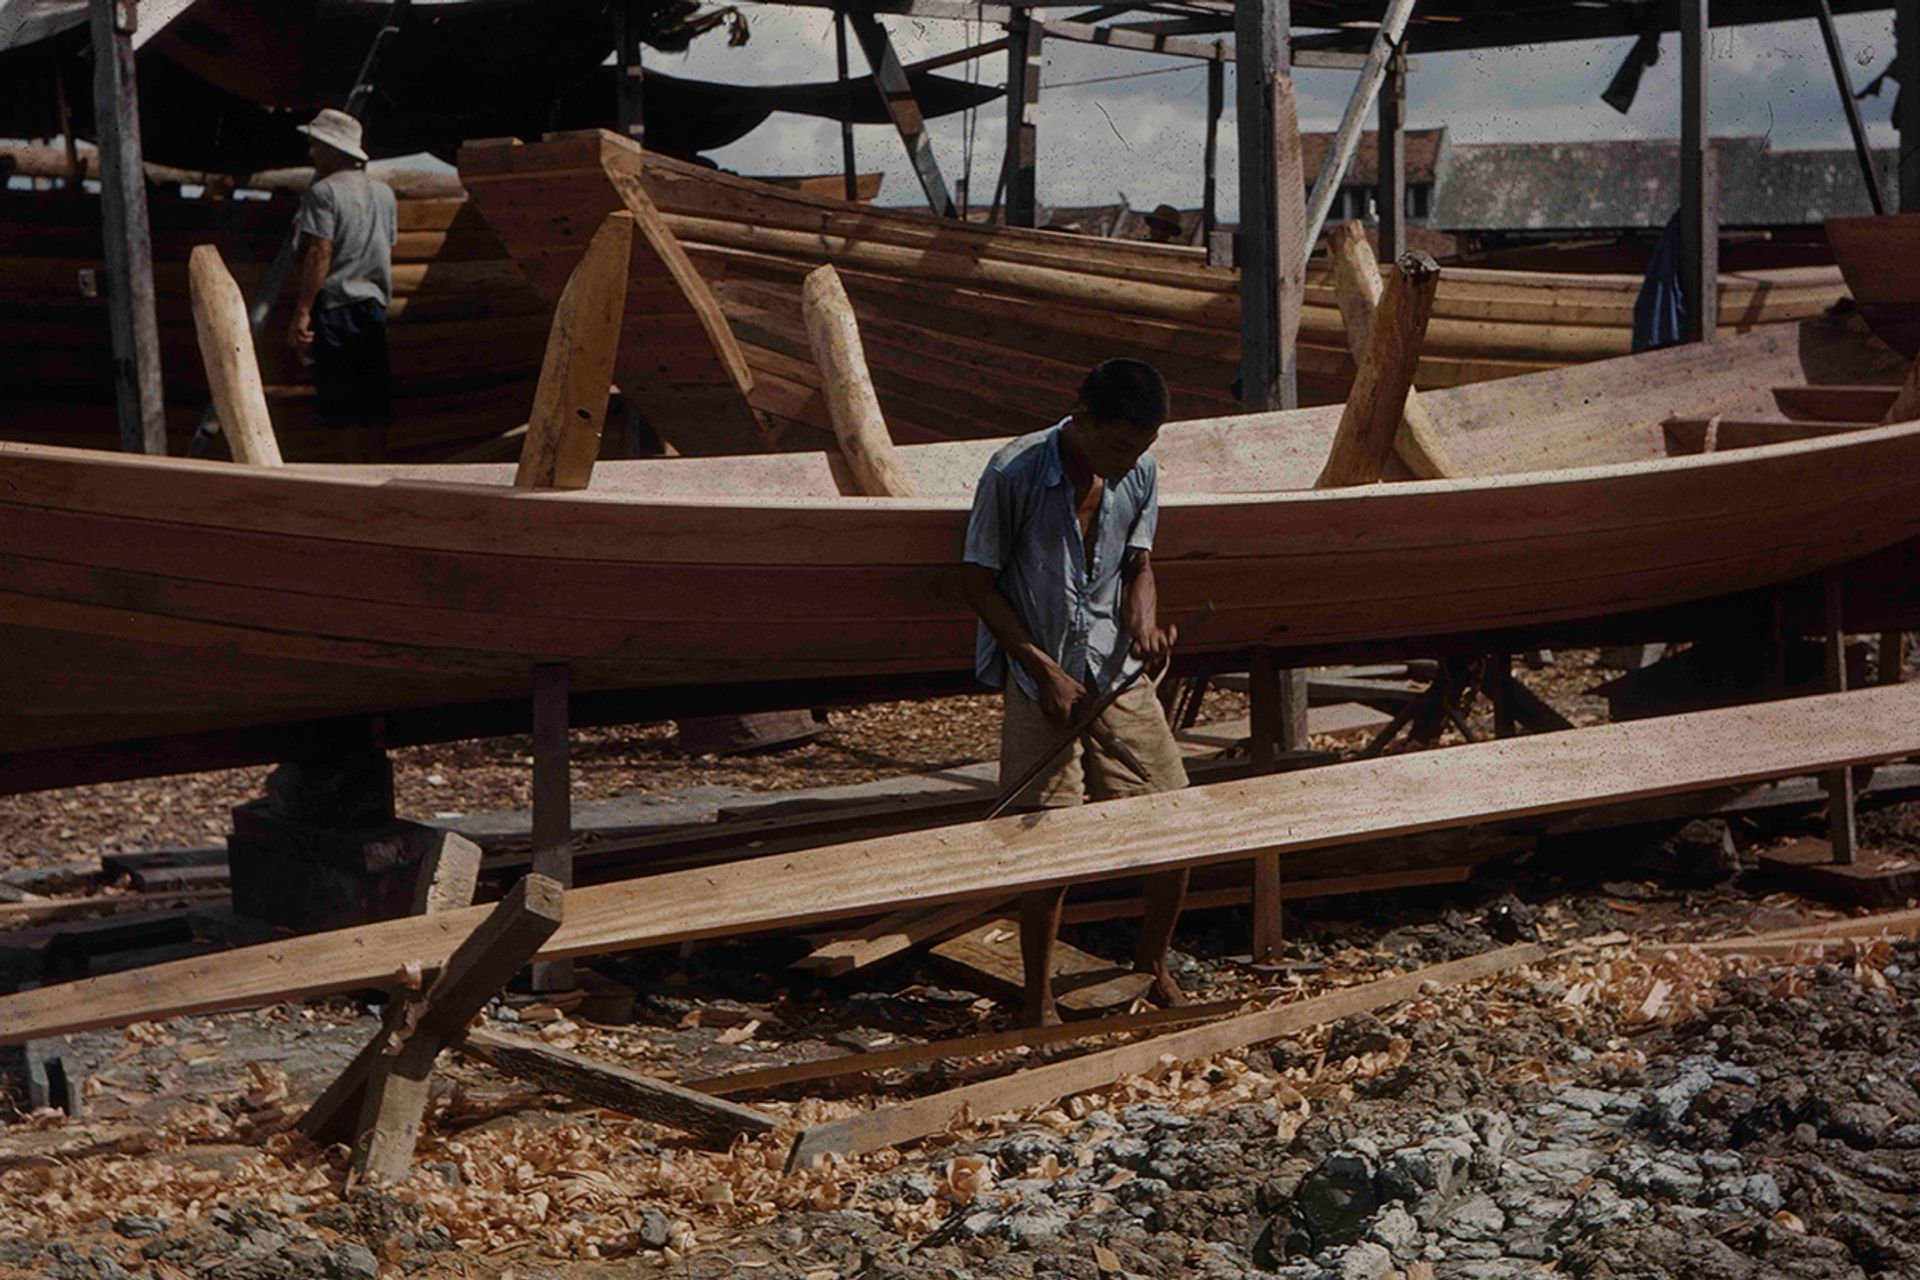 On a narrow strip of land between Beach Road and the sea wall, wooden sea-going vessels and small sampans were built using traditional tools in the 1950s.